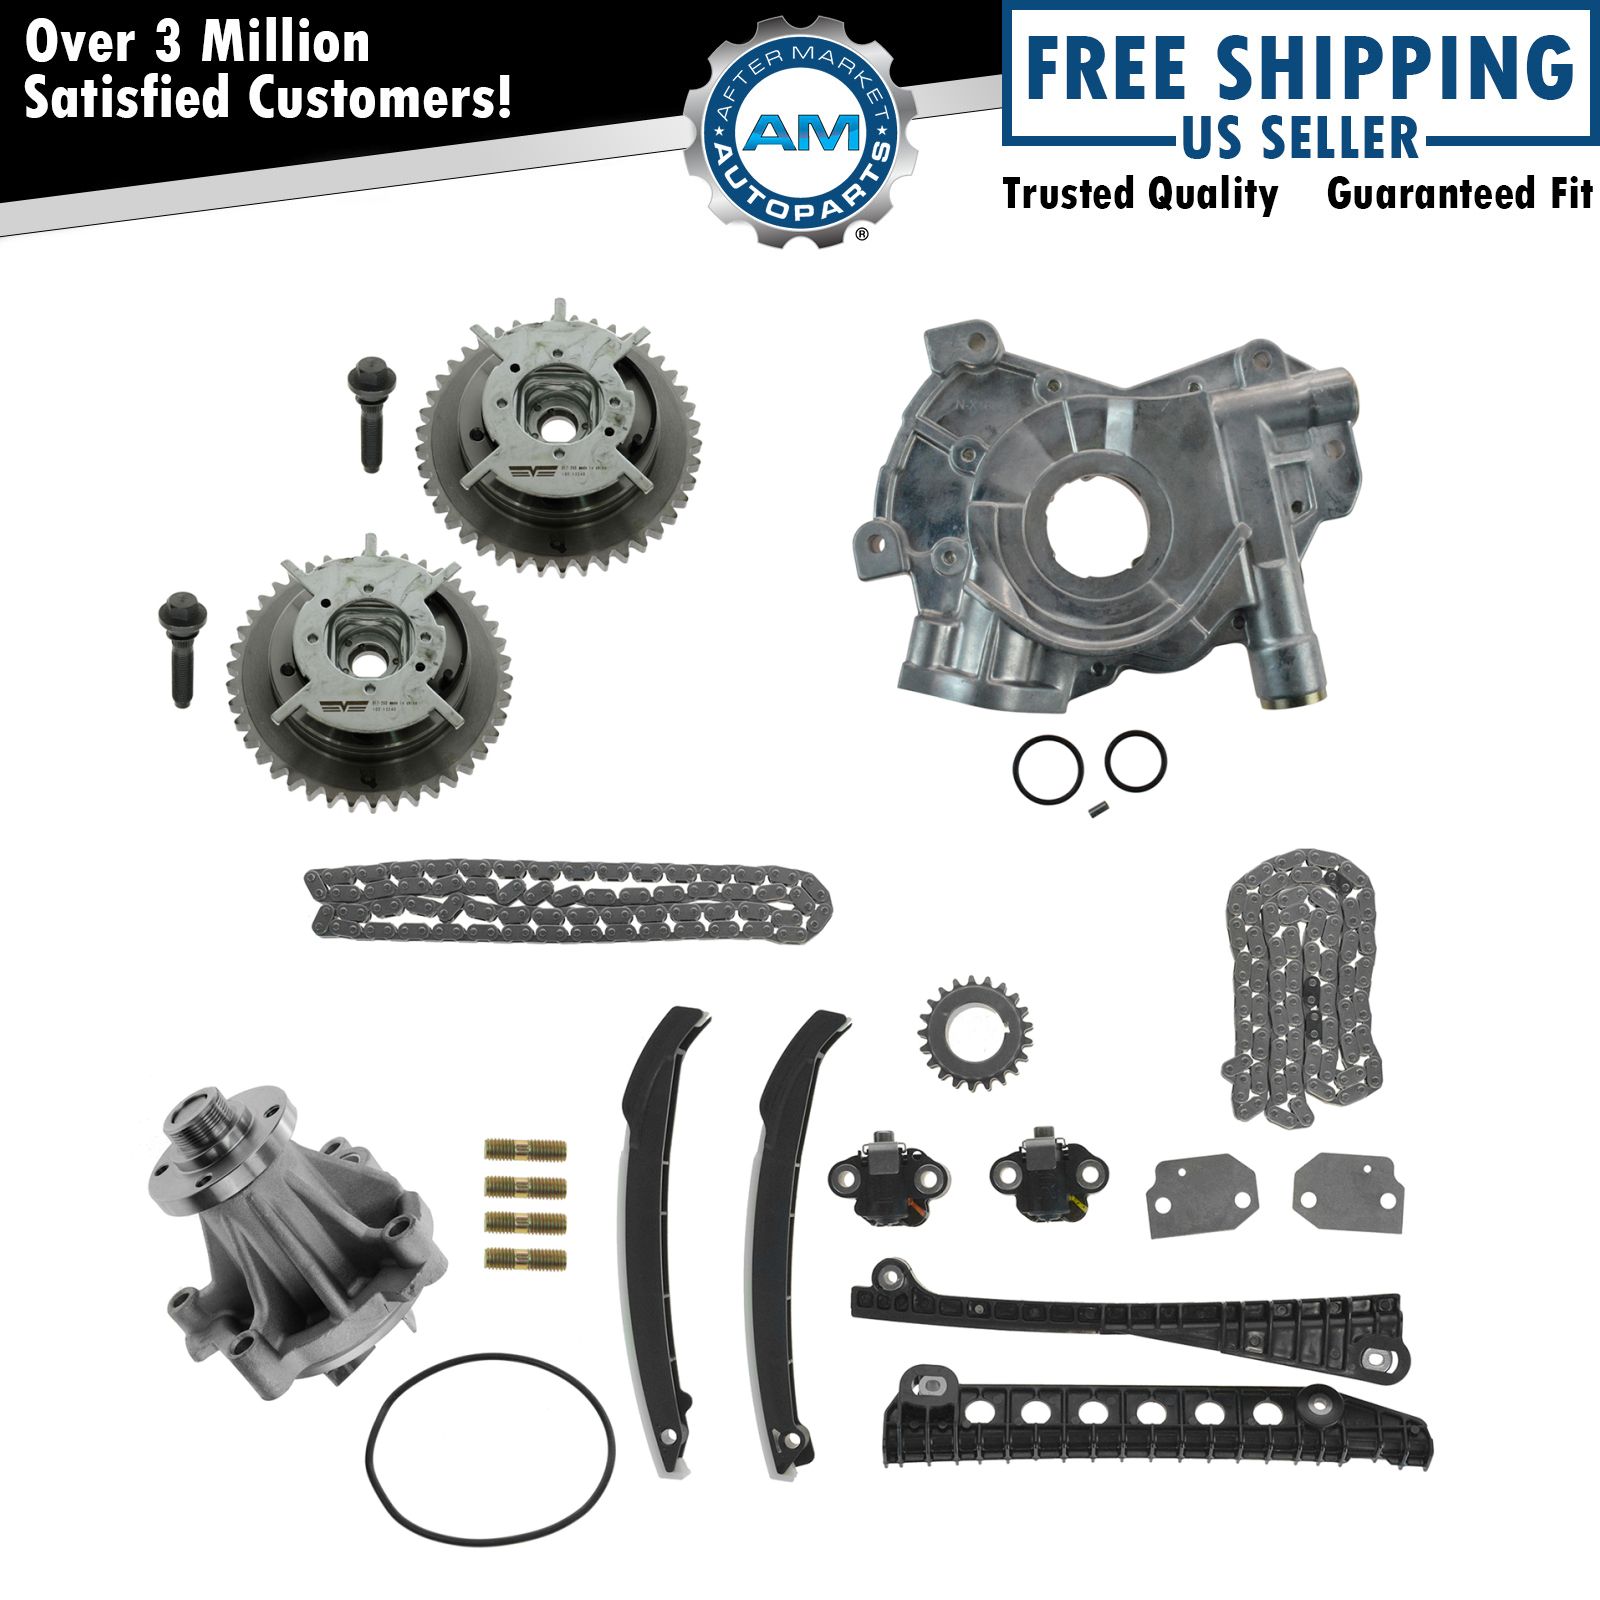 Timing Chain Sprocket Water Oil Pump Guide Kit Set for F150 F250 Expedition 5.4L